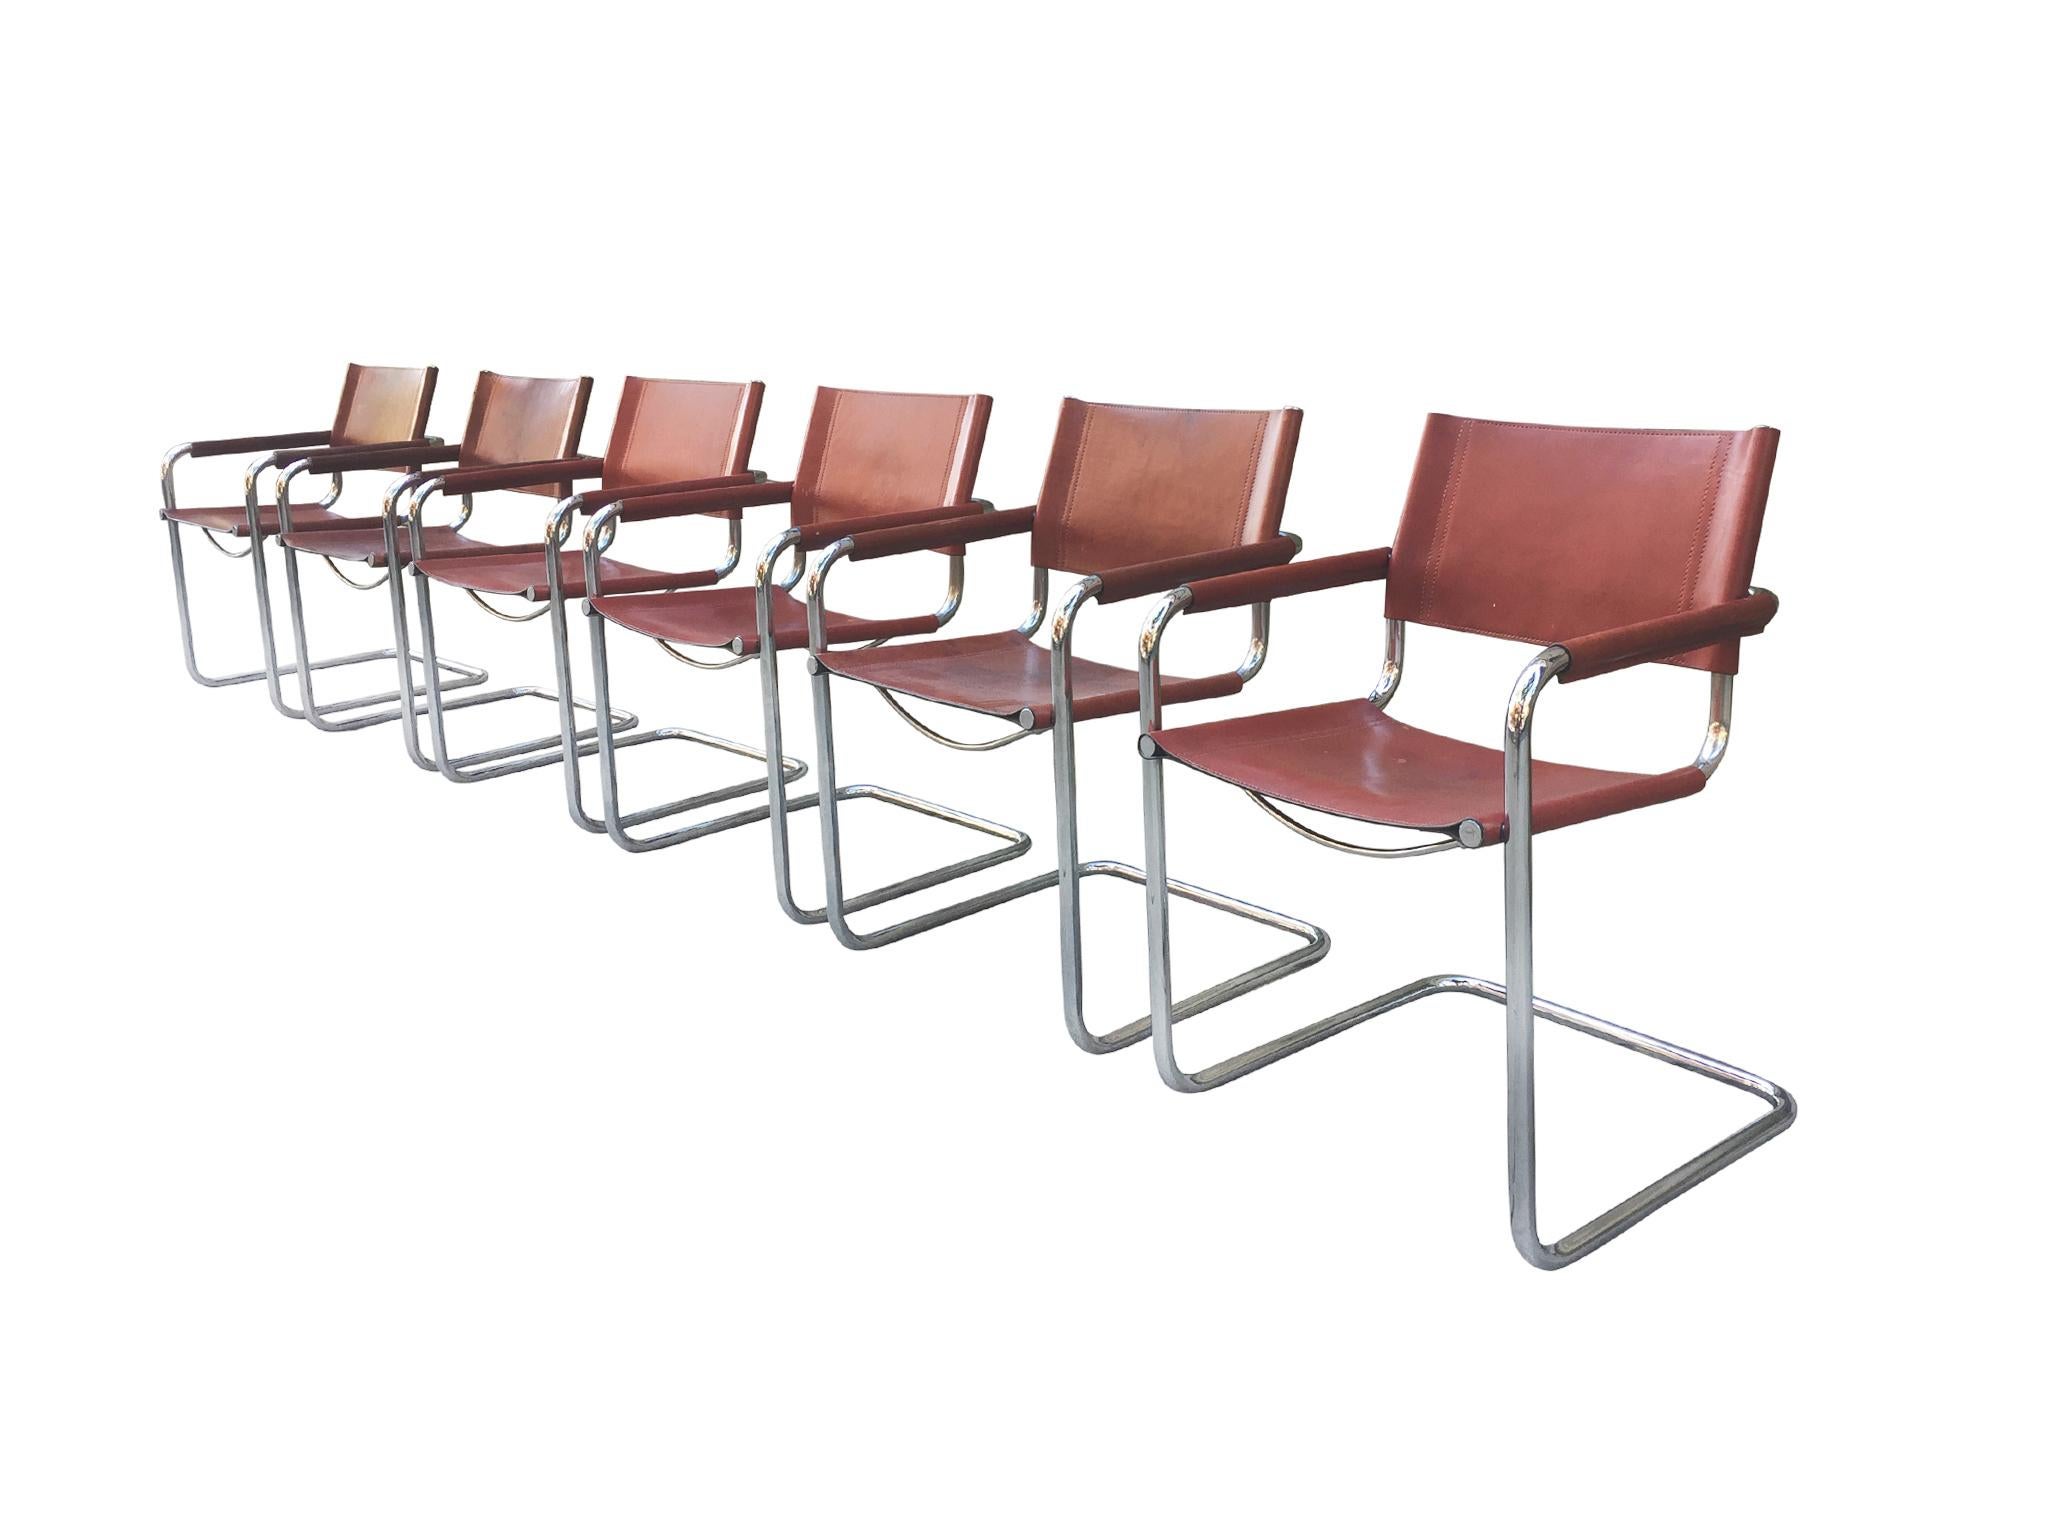 A handsome set of 6 dining chairs, made in the 1970s, with a nod to Bauhaus modernism, Matteo Grassi designs, and Campaign style furniture. The chairs consist of a chrome tubular frame and leather seating and back. The leather is stretched over the